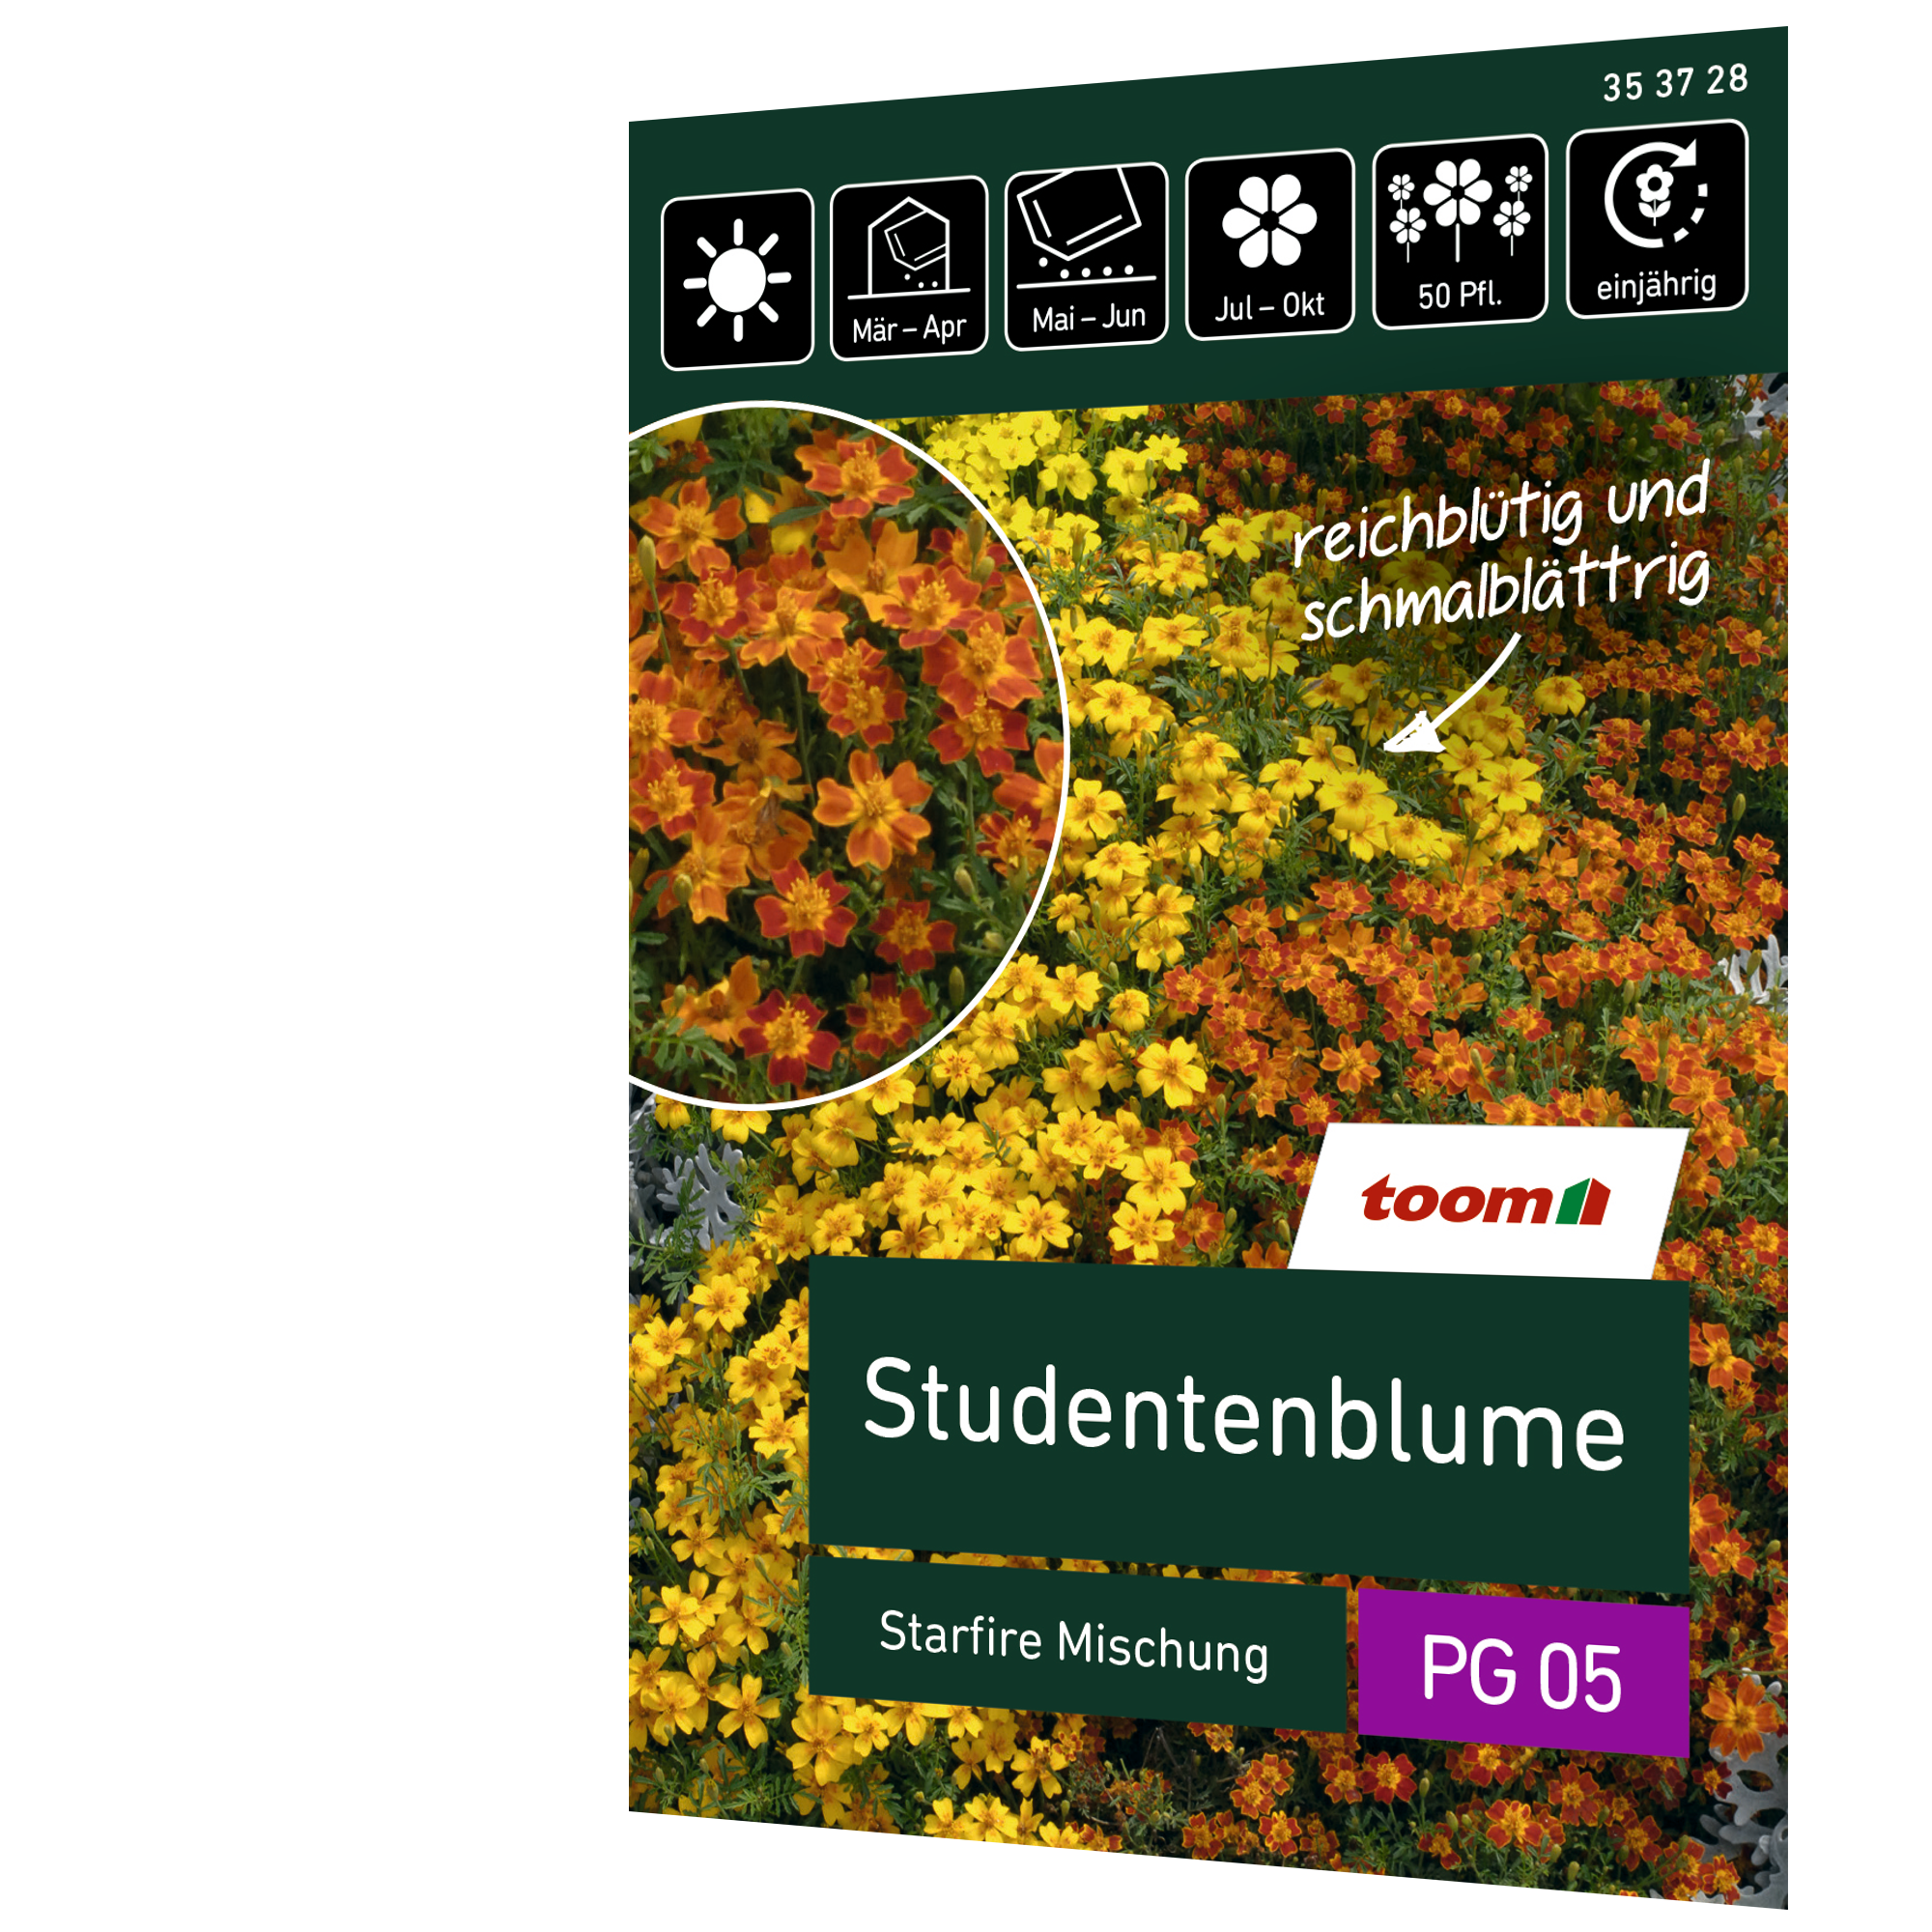 Studentenblume 'Starfire Mischung' + product picture